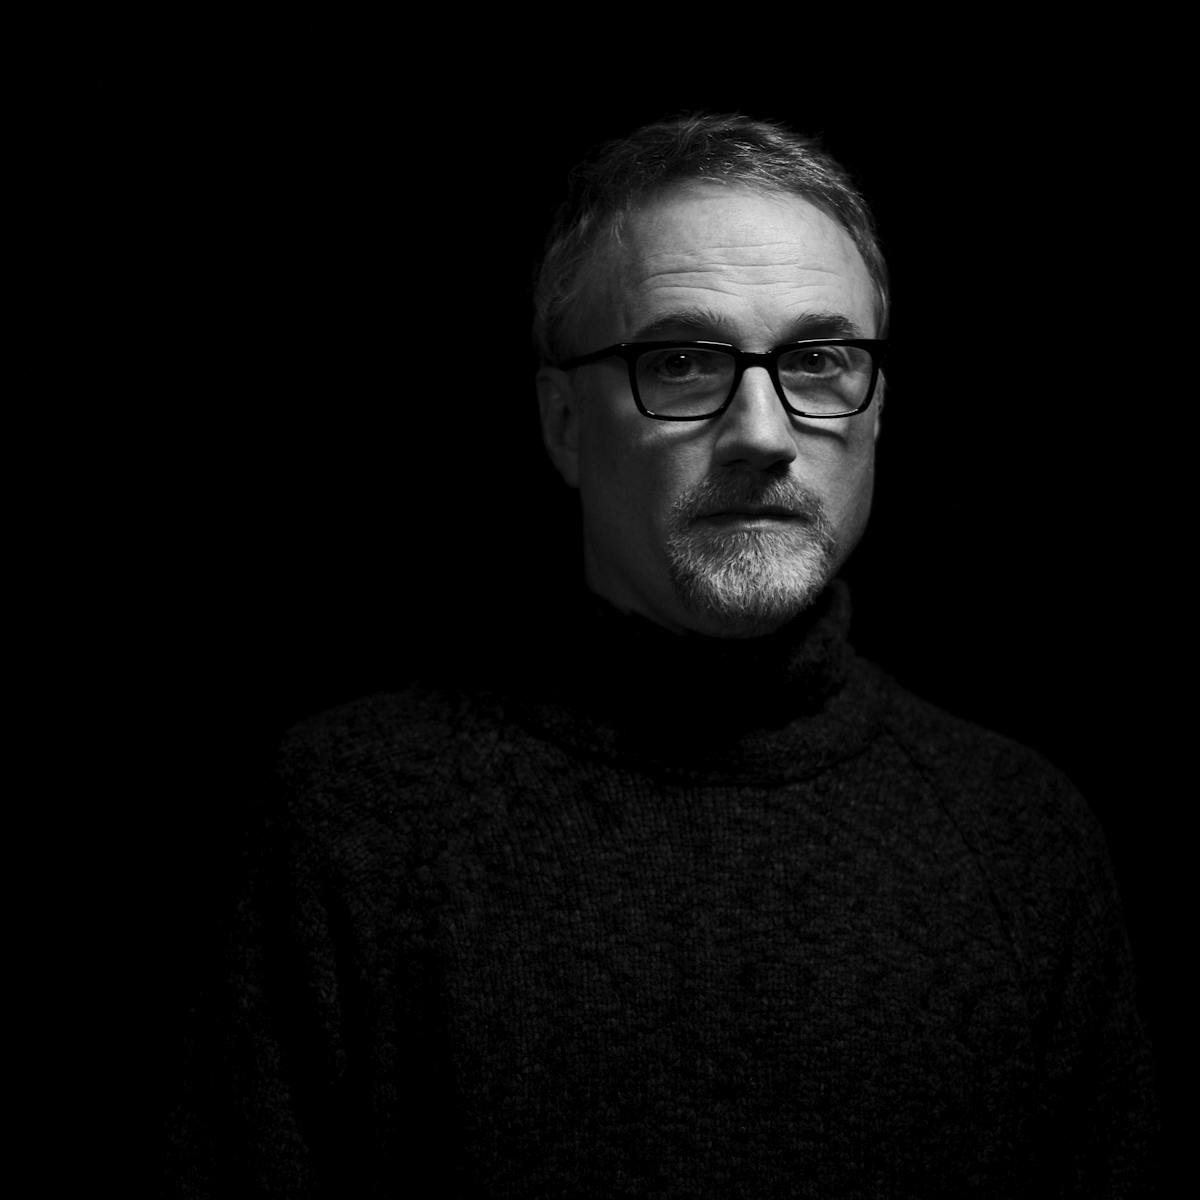 In this dark picture, all you can see is David Fincher's face, wearing a pair of black glasses.